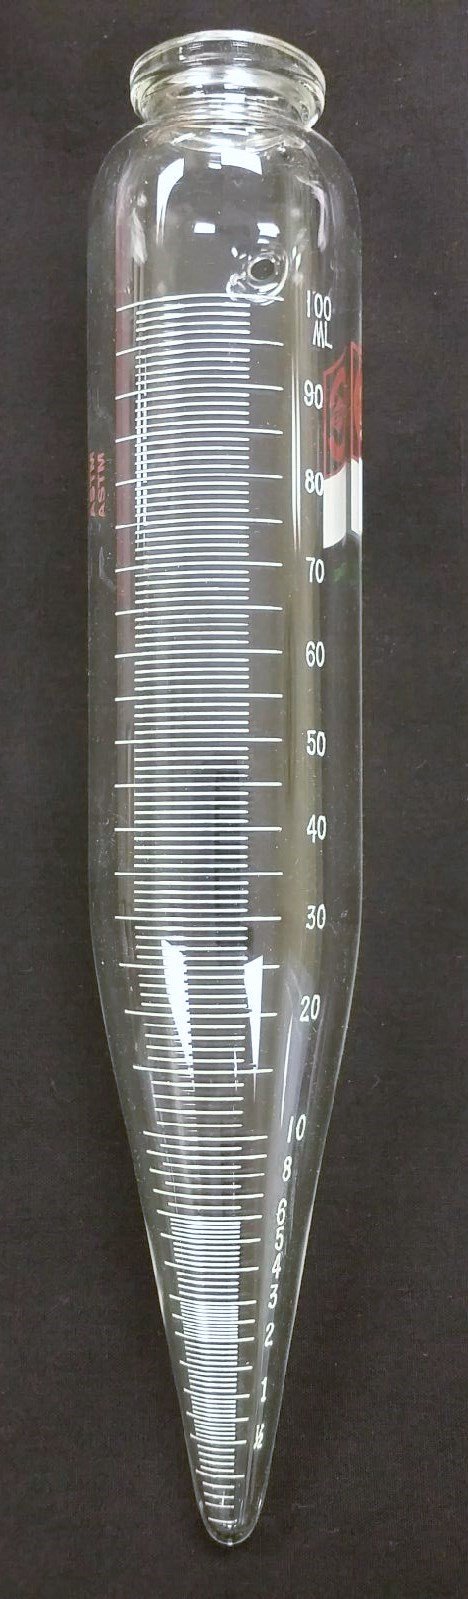 27350-600 Weathering Tube (Box/6) with Vent Hole, 100 ml